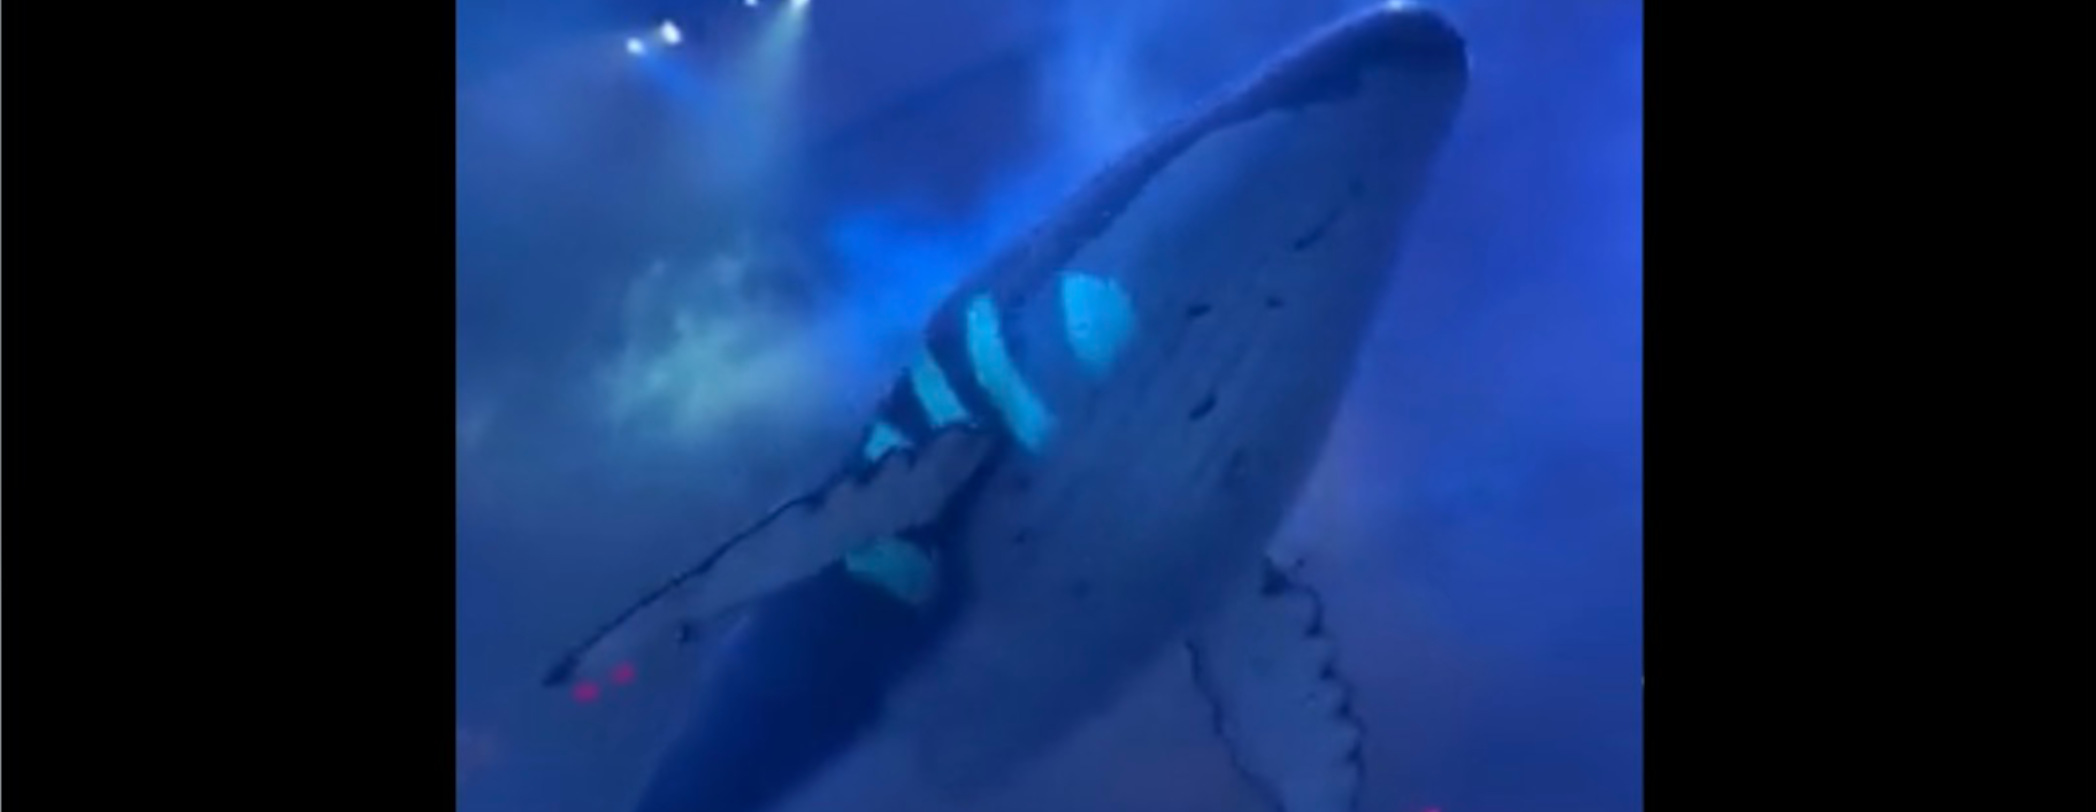 Phish Deploy Giant 3D Whales and Dolphins at Show, the Internet Loses it